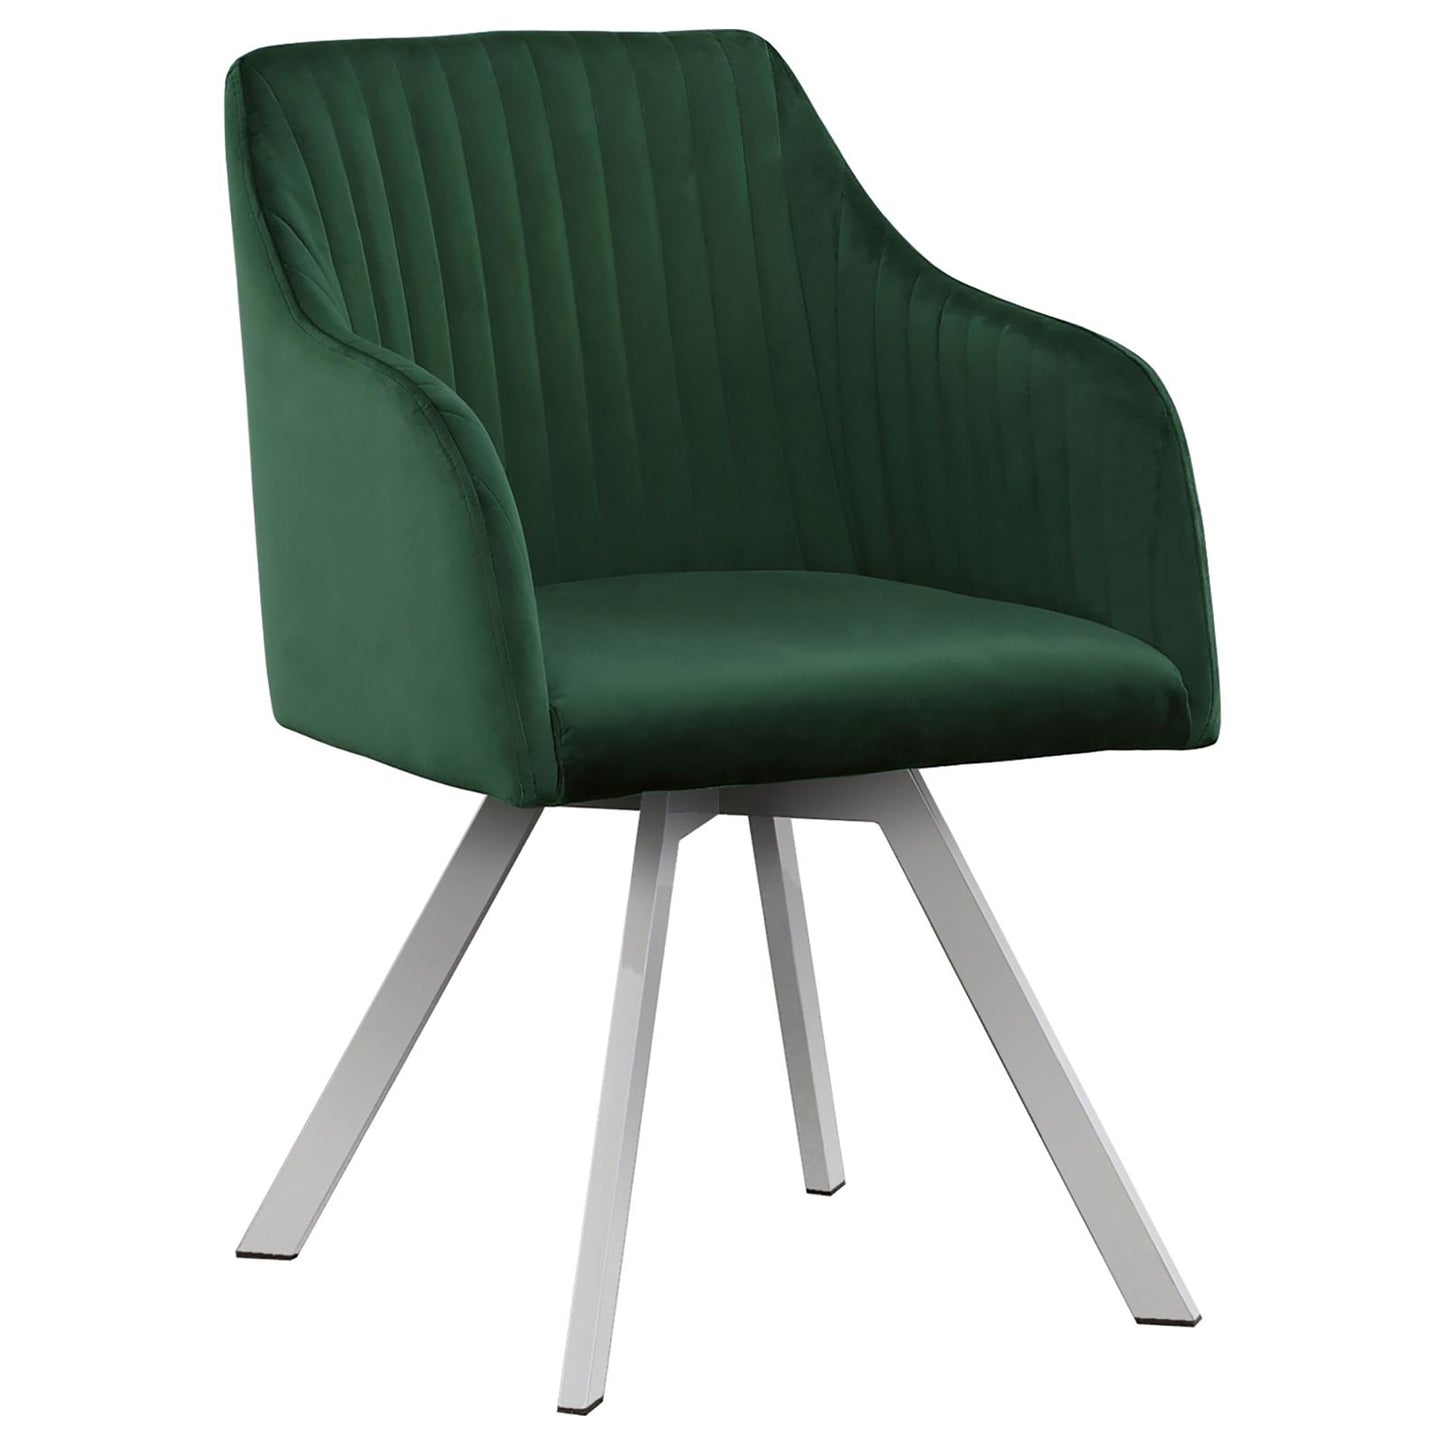 Green Channeled Sloped Arm Swivel Chair